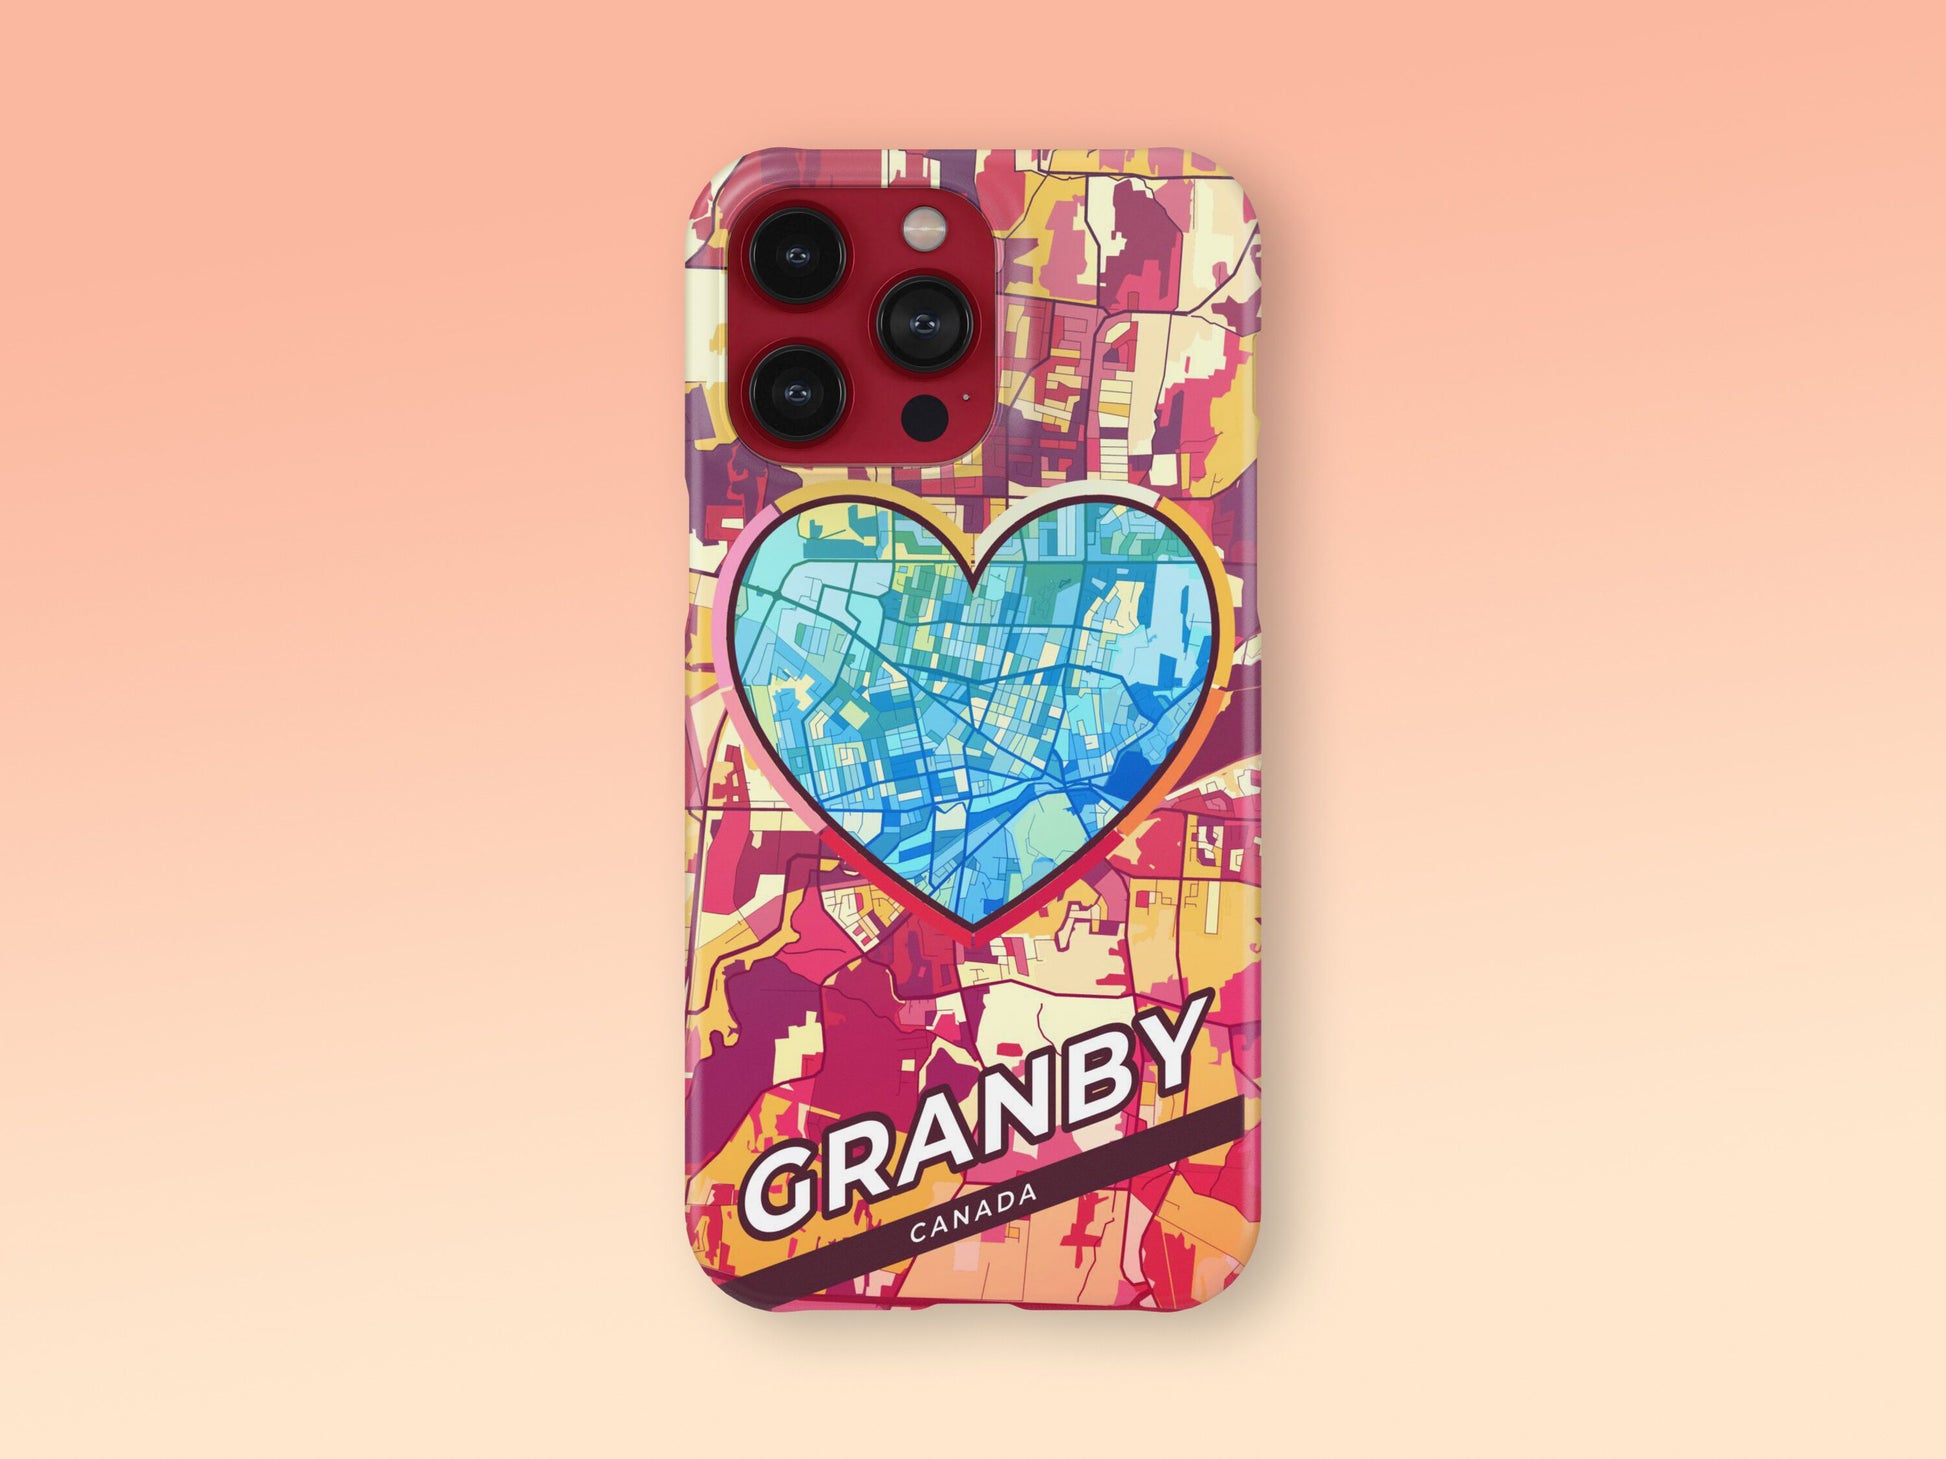 Granby Canada slim phone case with colorful icon. Birthday, wedding or housewarming gift. Couple match cases. 2